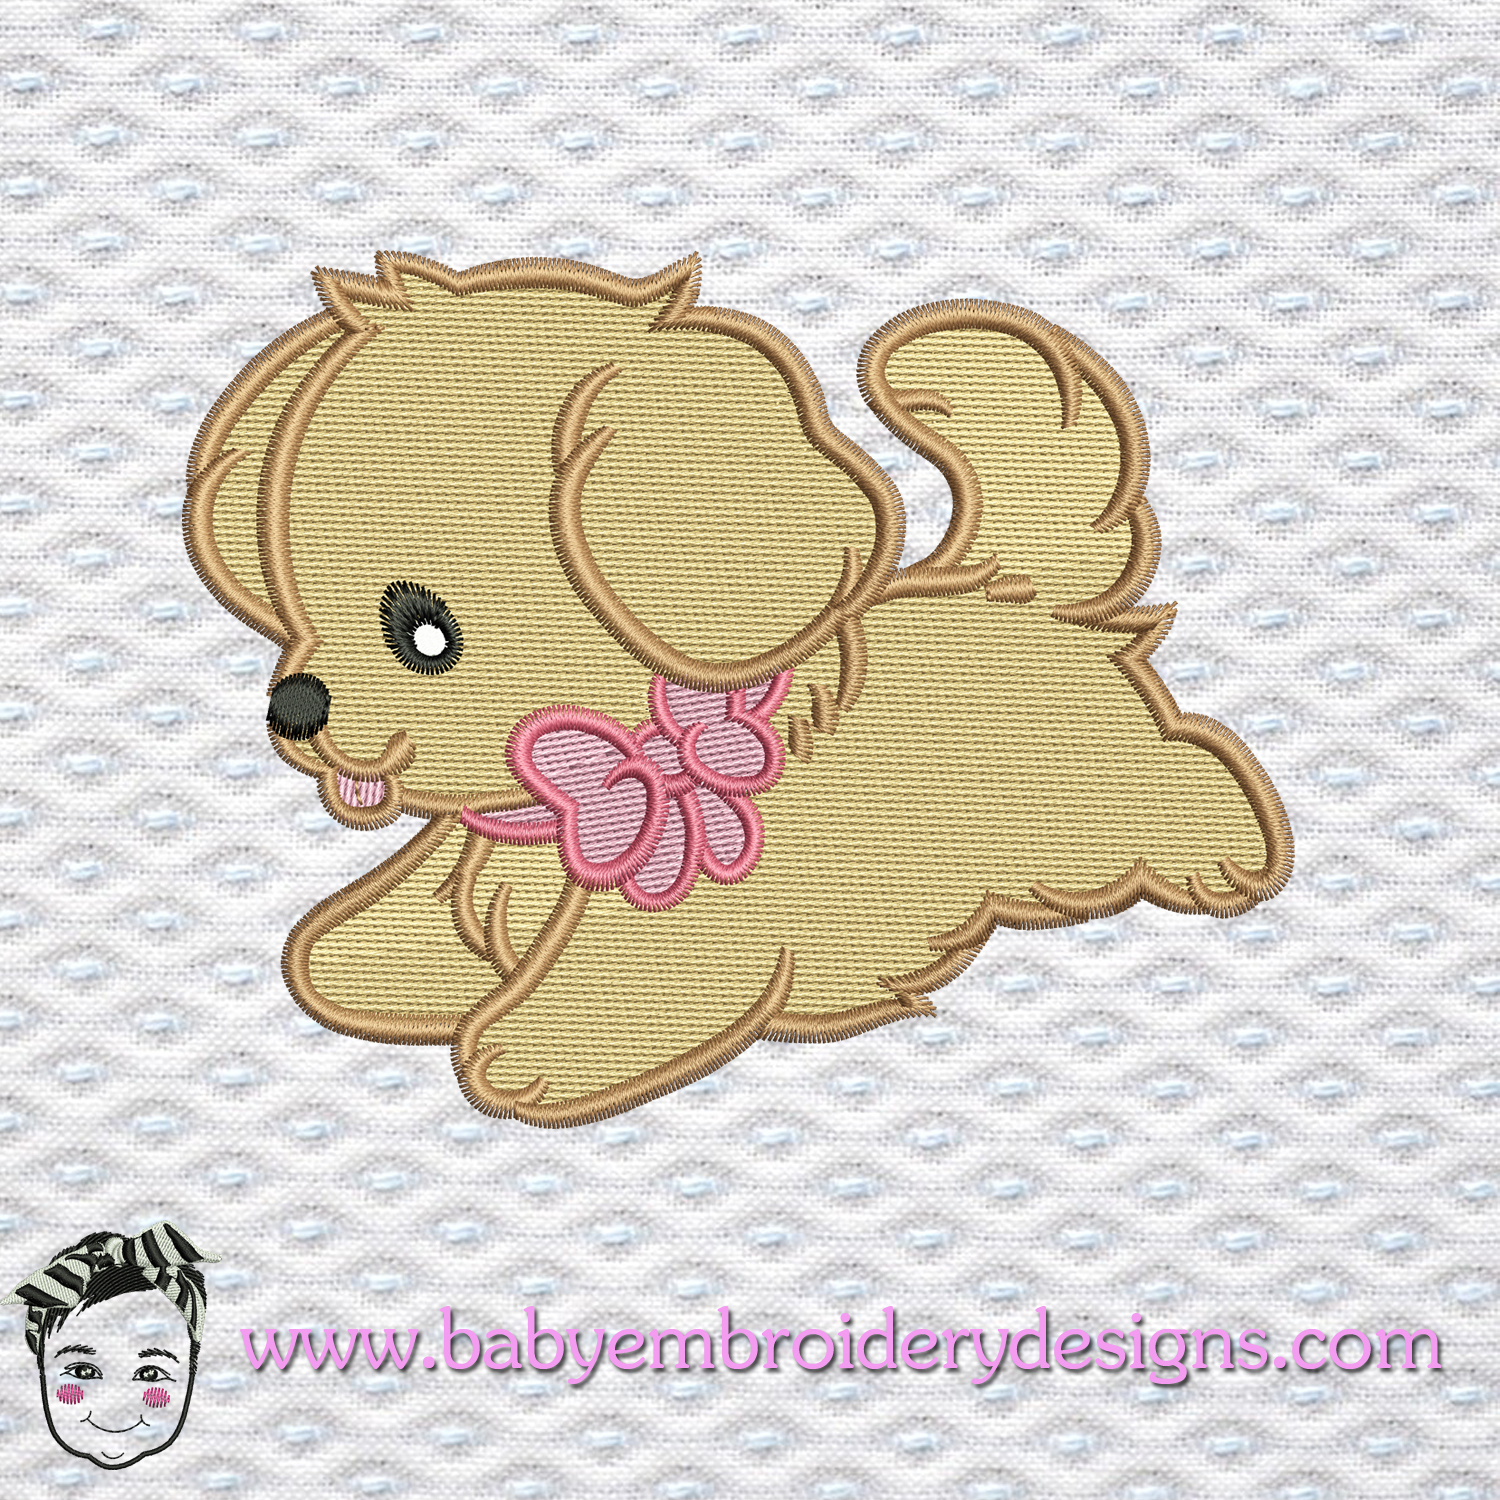 Baby Embroidery Patterns Embroidery Designs Ba Golden Retriever Instant Download